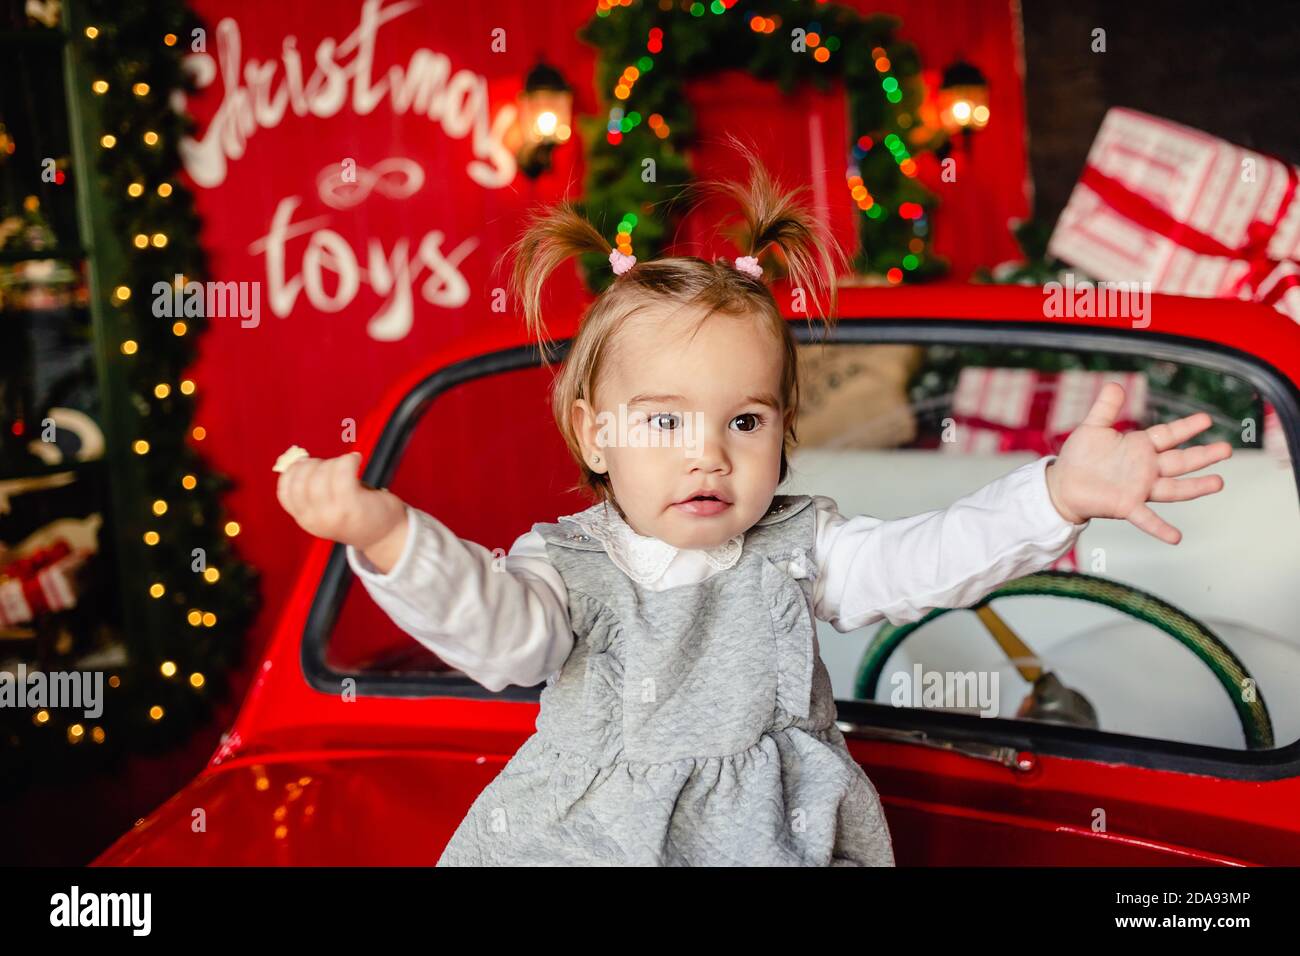 Joyful baby sitting on red Christmas car in the living room at home. Merry Christmas and Happy Holidays! Stock Photo